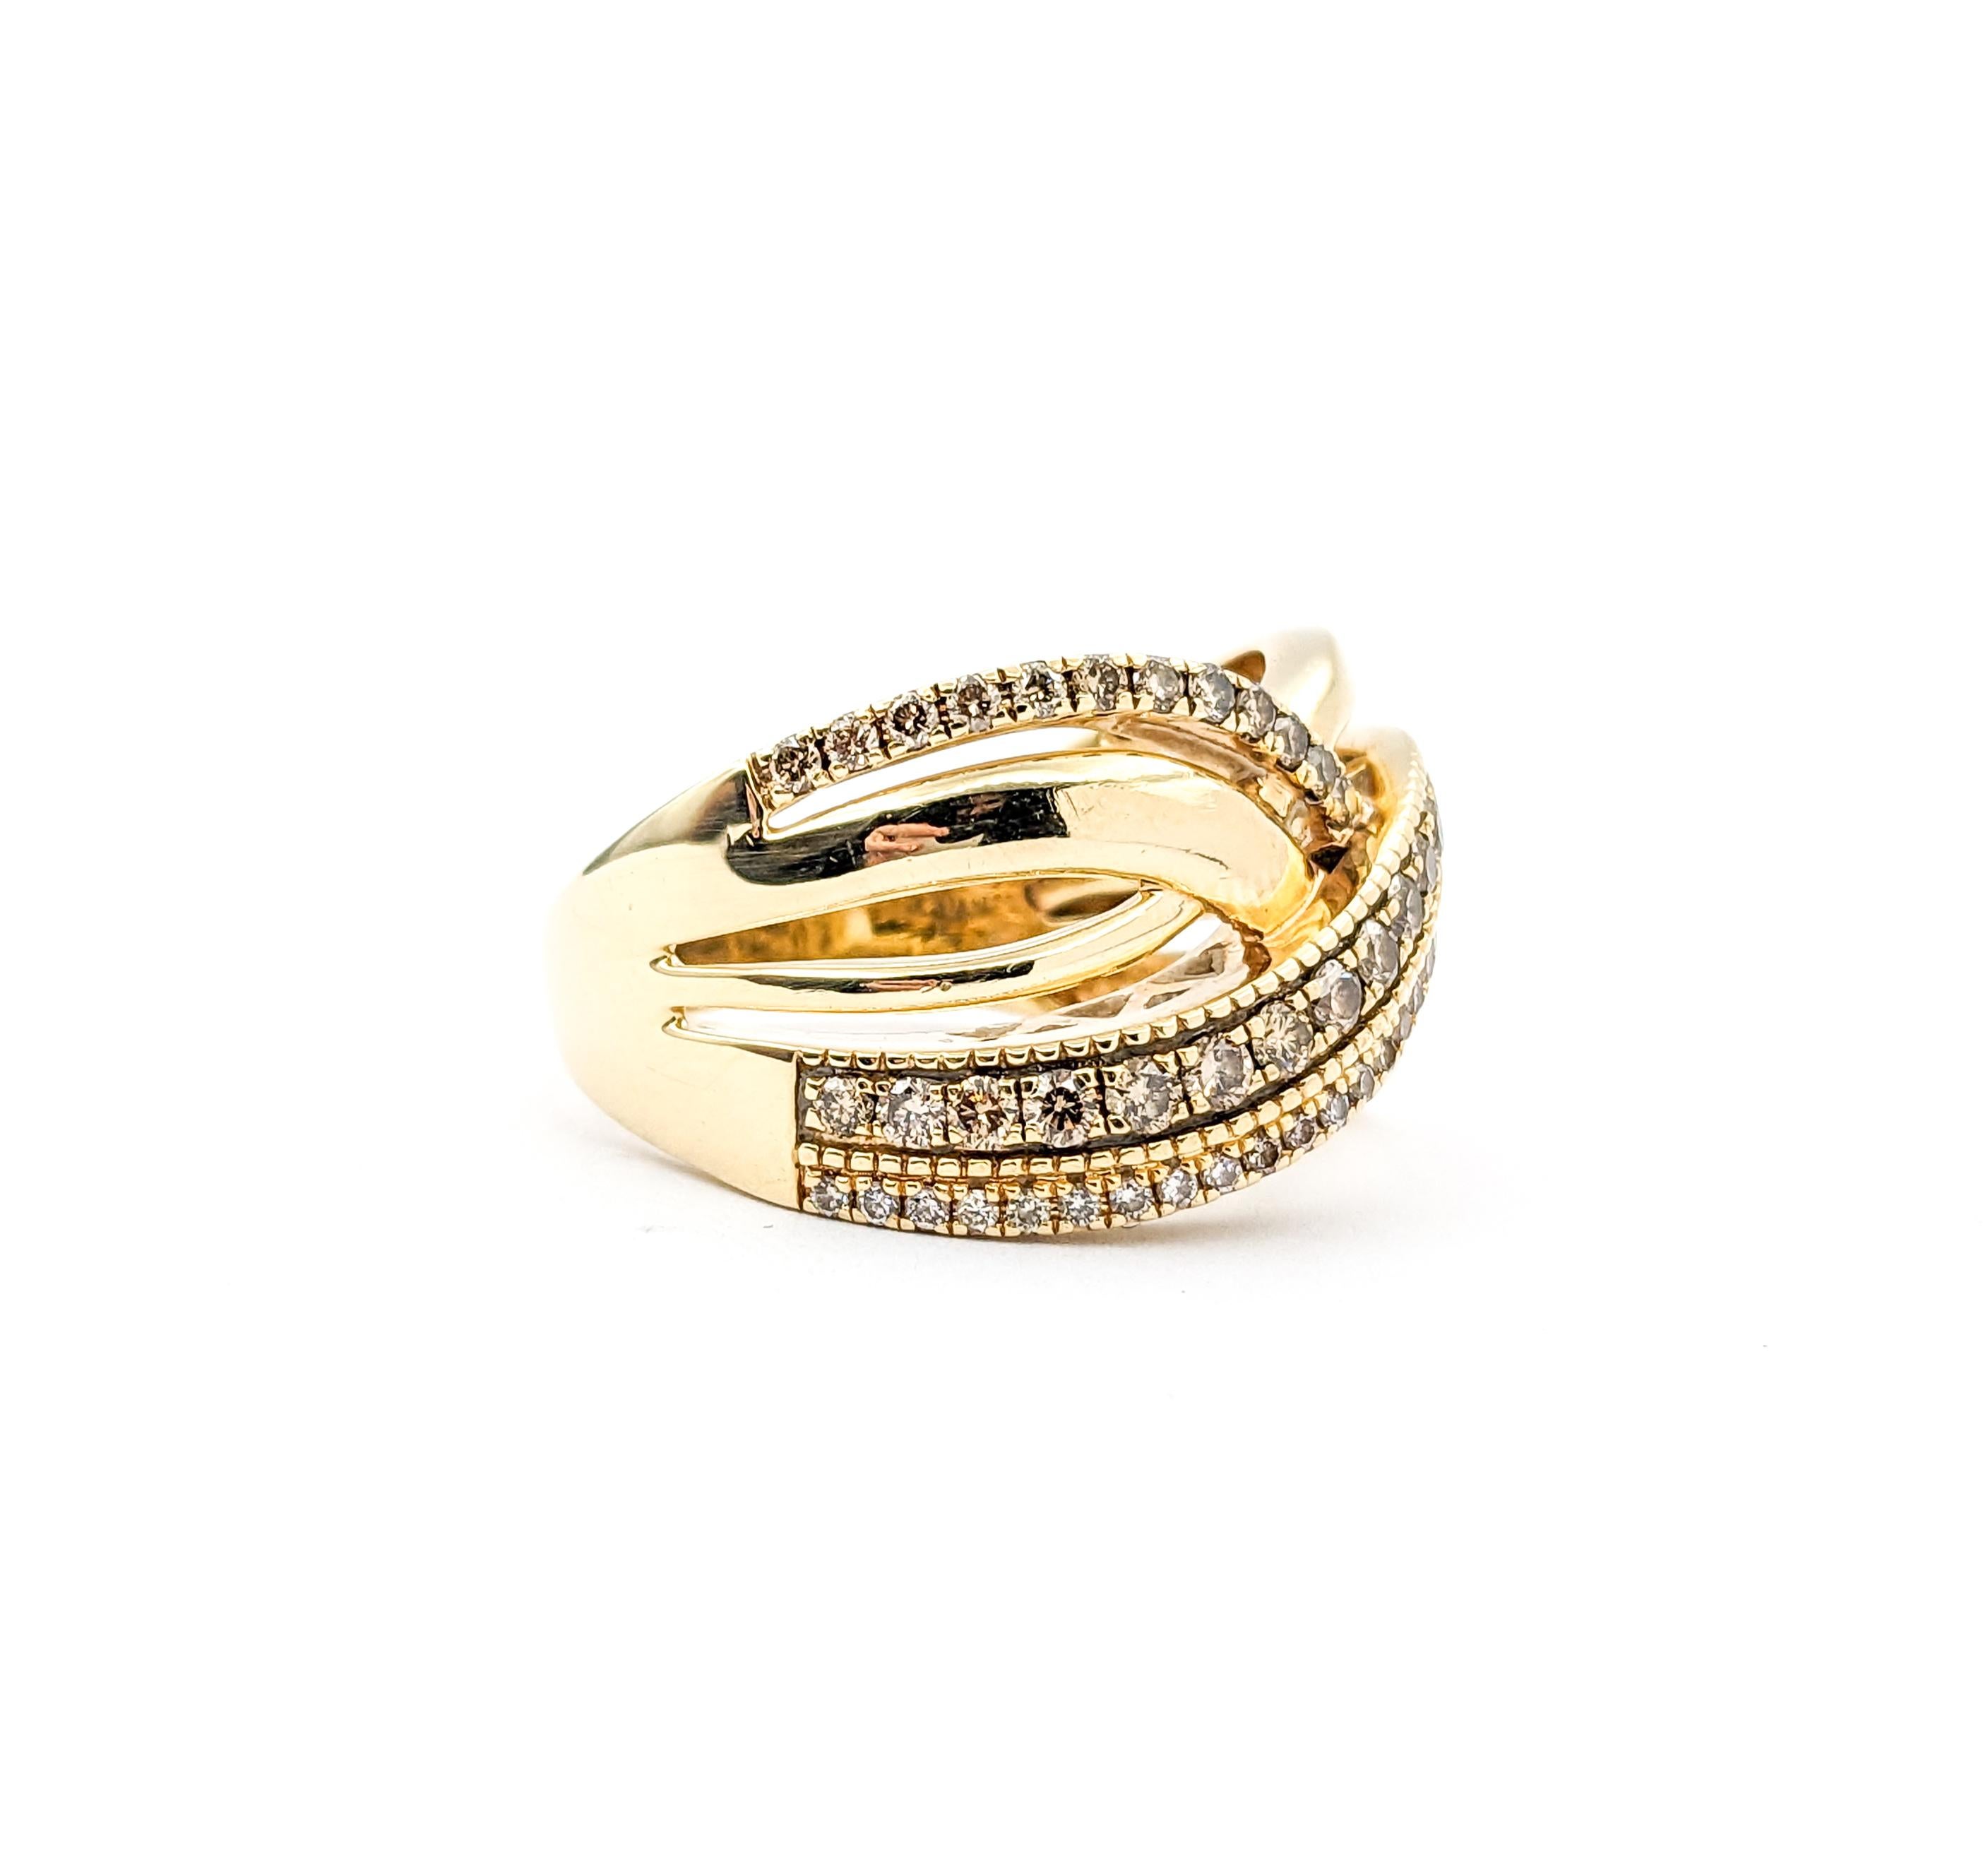 1ctw Diamond Ring In Yellow Gold For Sale 1